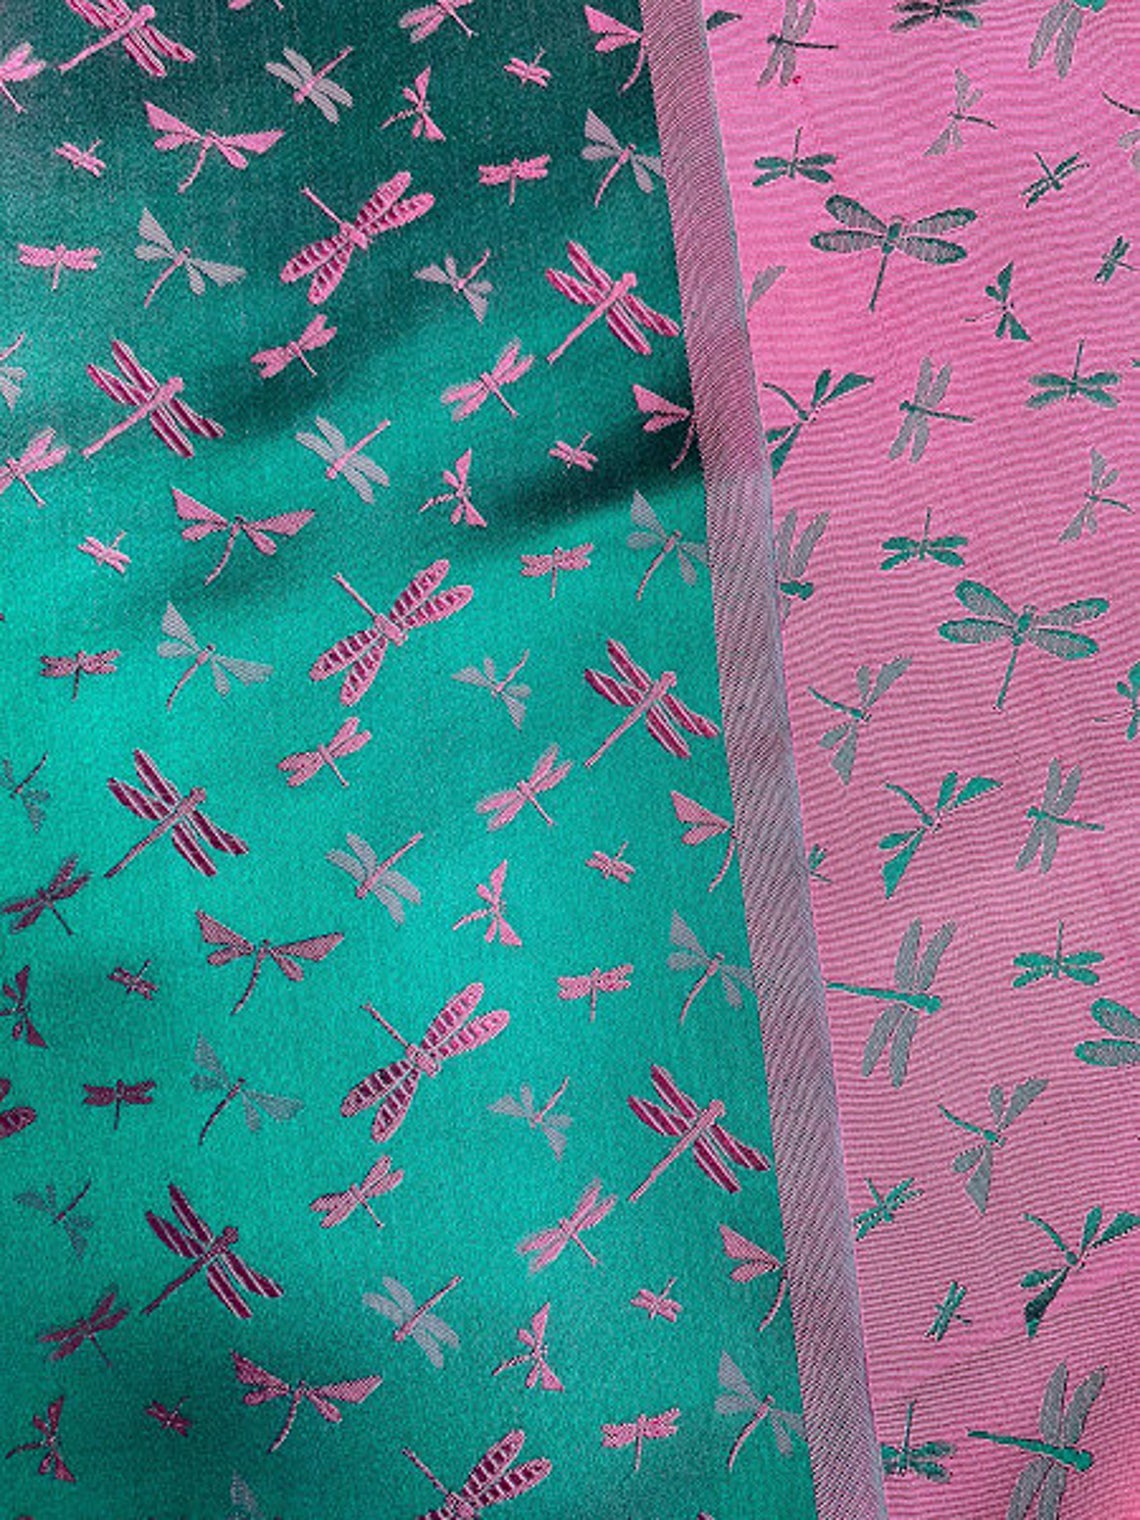 PURE MULBERRY SILK | NATURAL SILK | HANDMADE IN VIETNAM | DRAGONFLY PATTERN | GREEN AND PURPLE | SILK WITH DESIGN